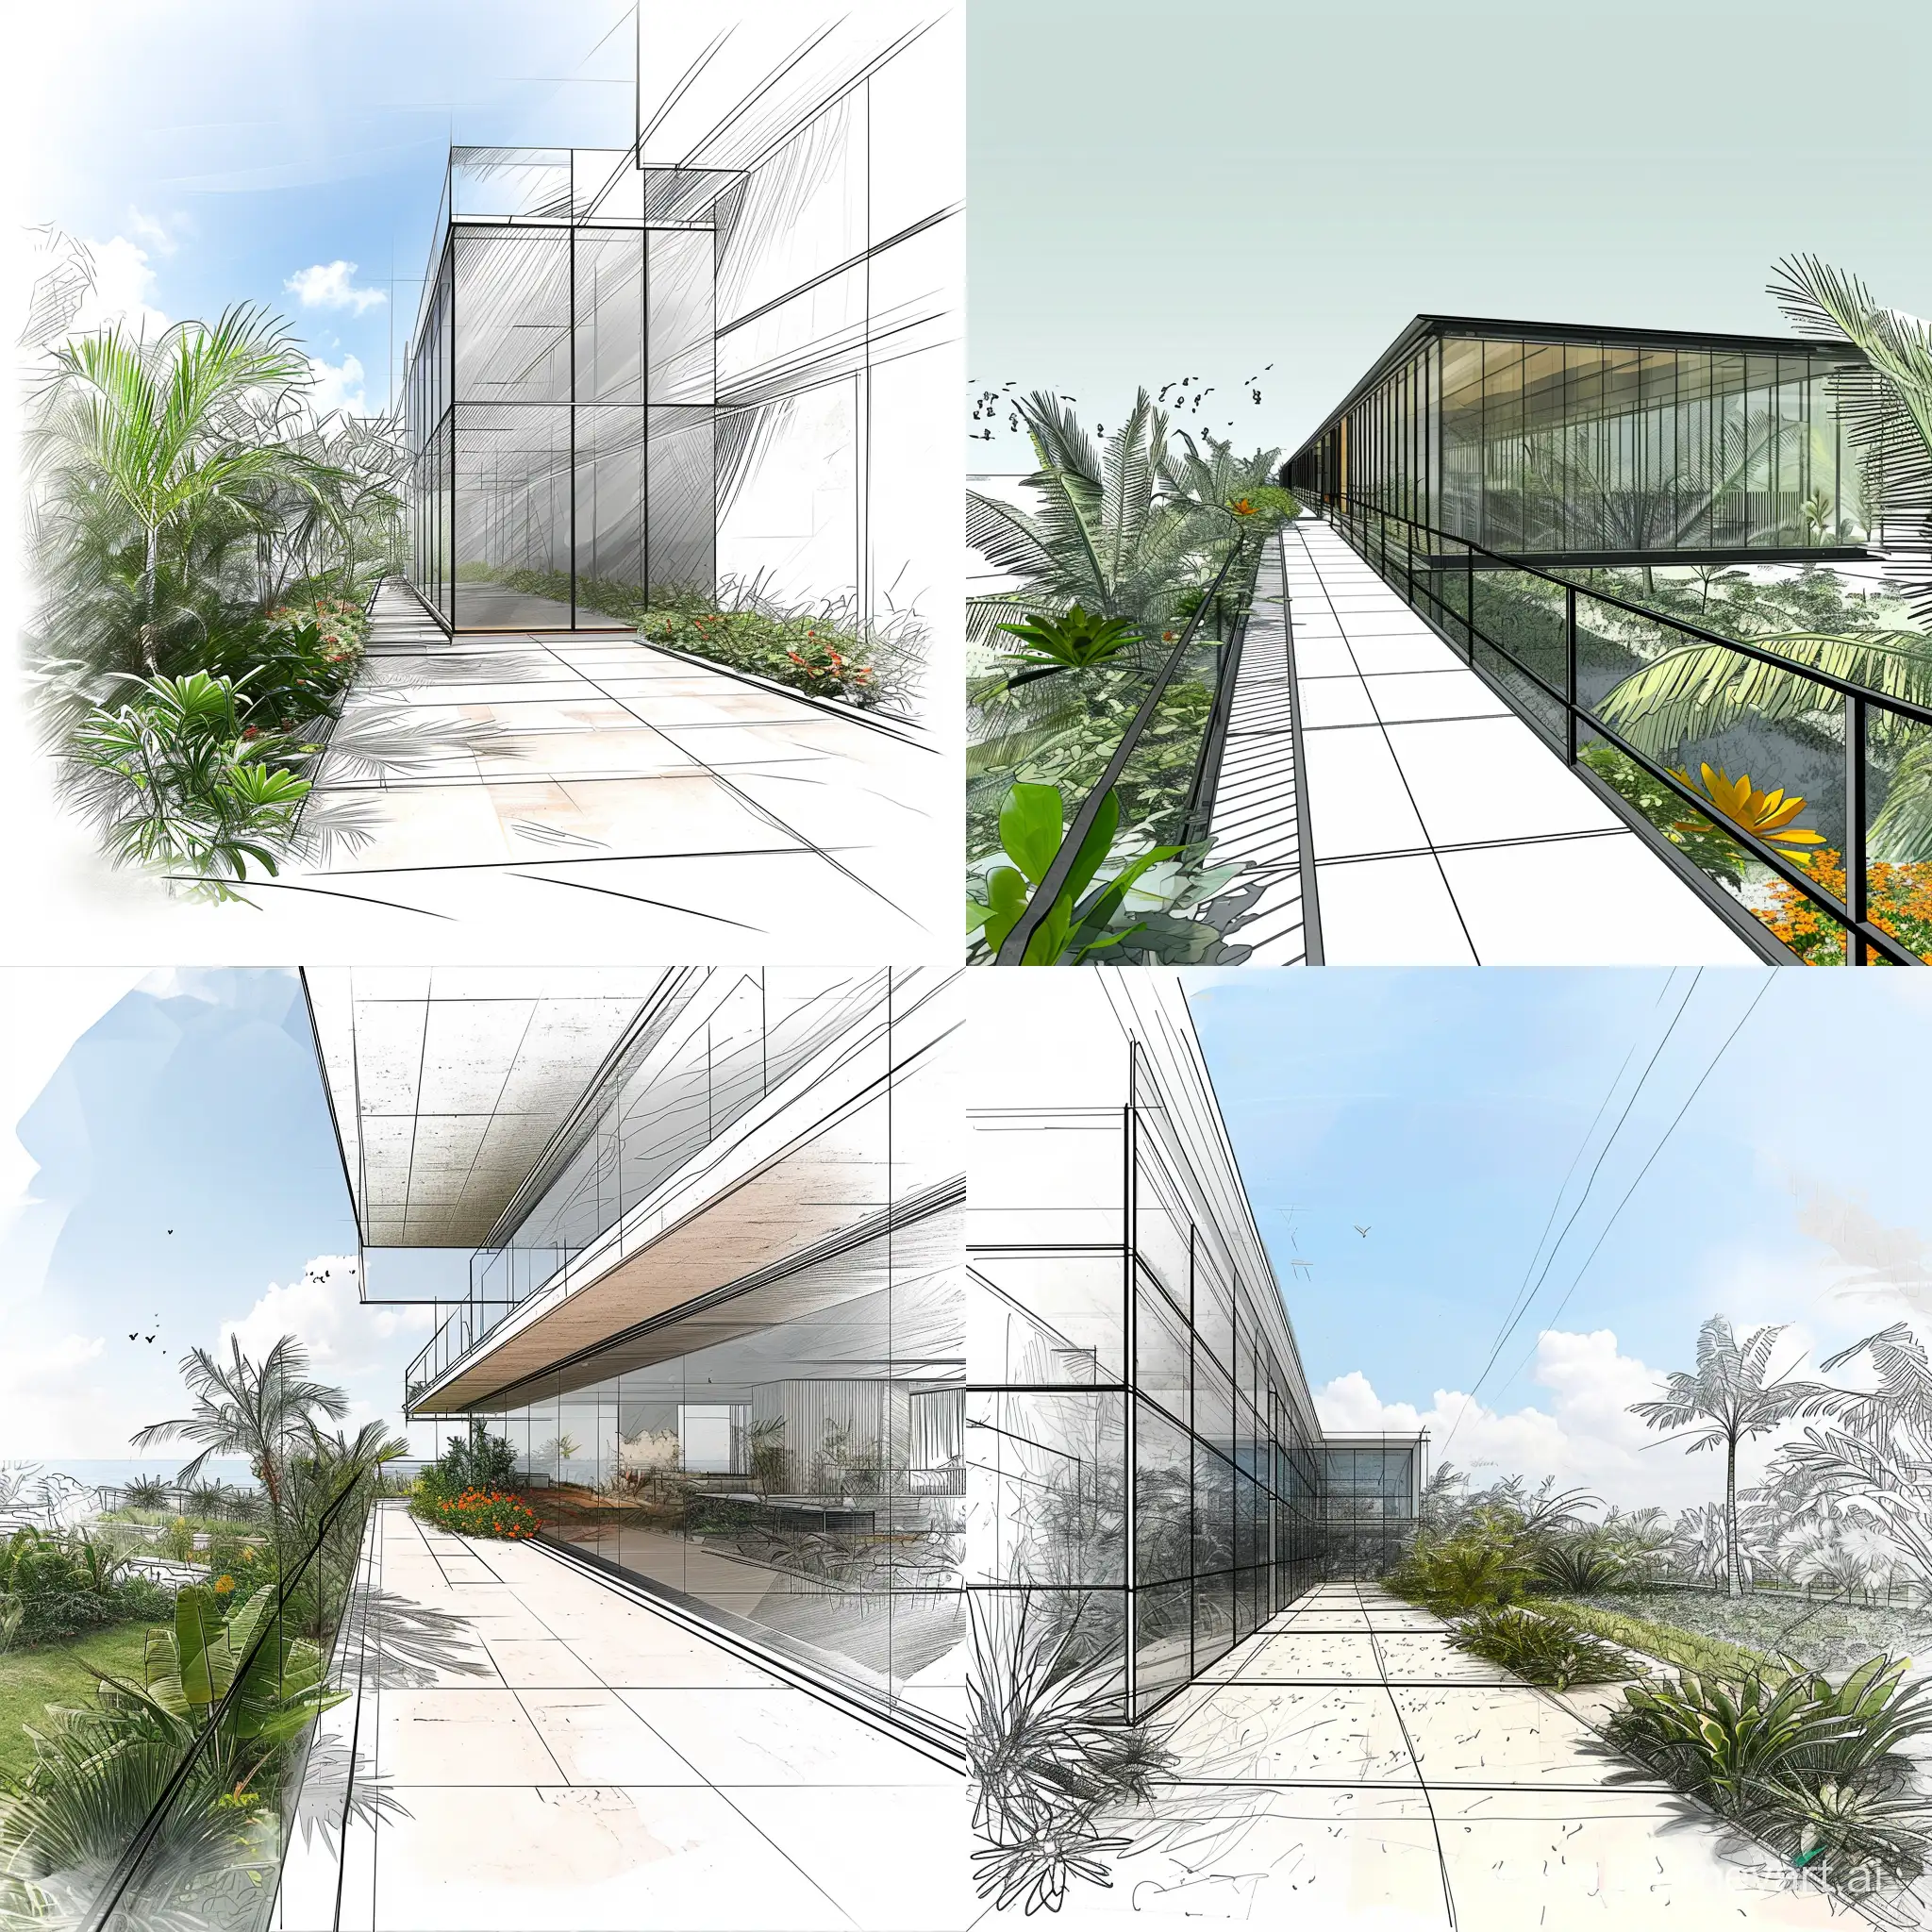 3D sketch of a linear building one floor height with a beatiful glass facade facing some plants and green area